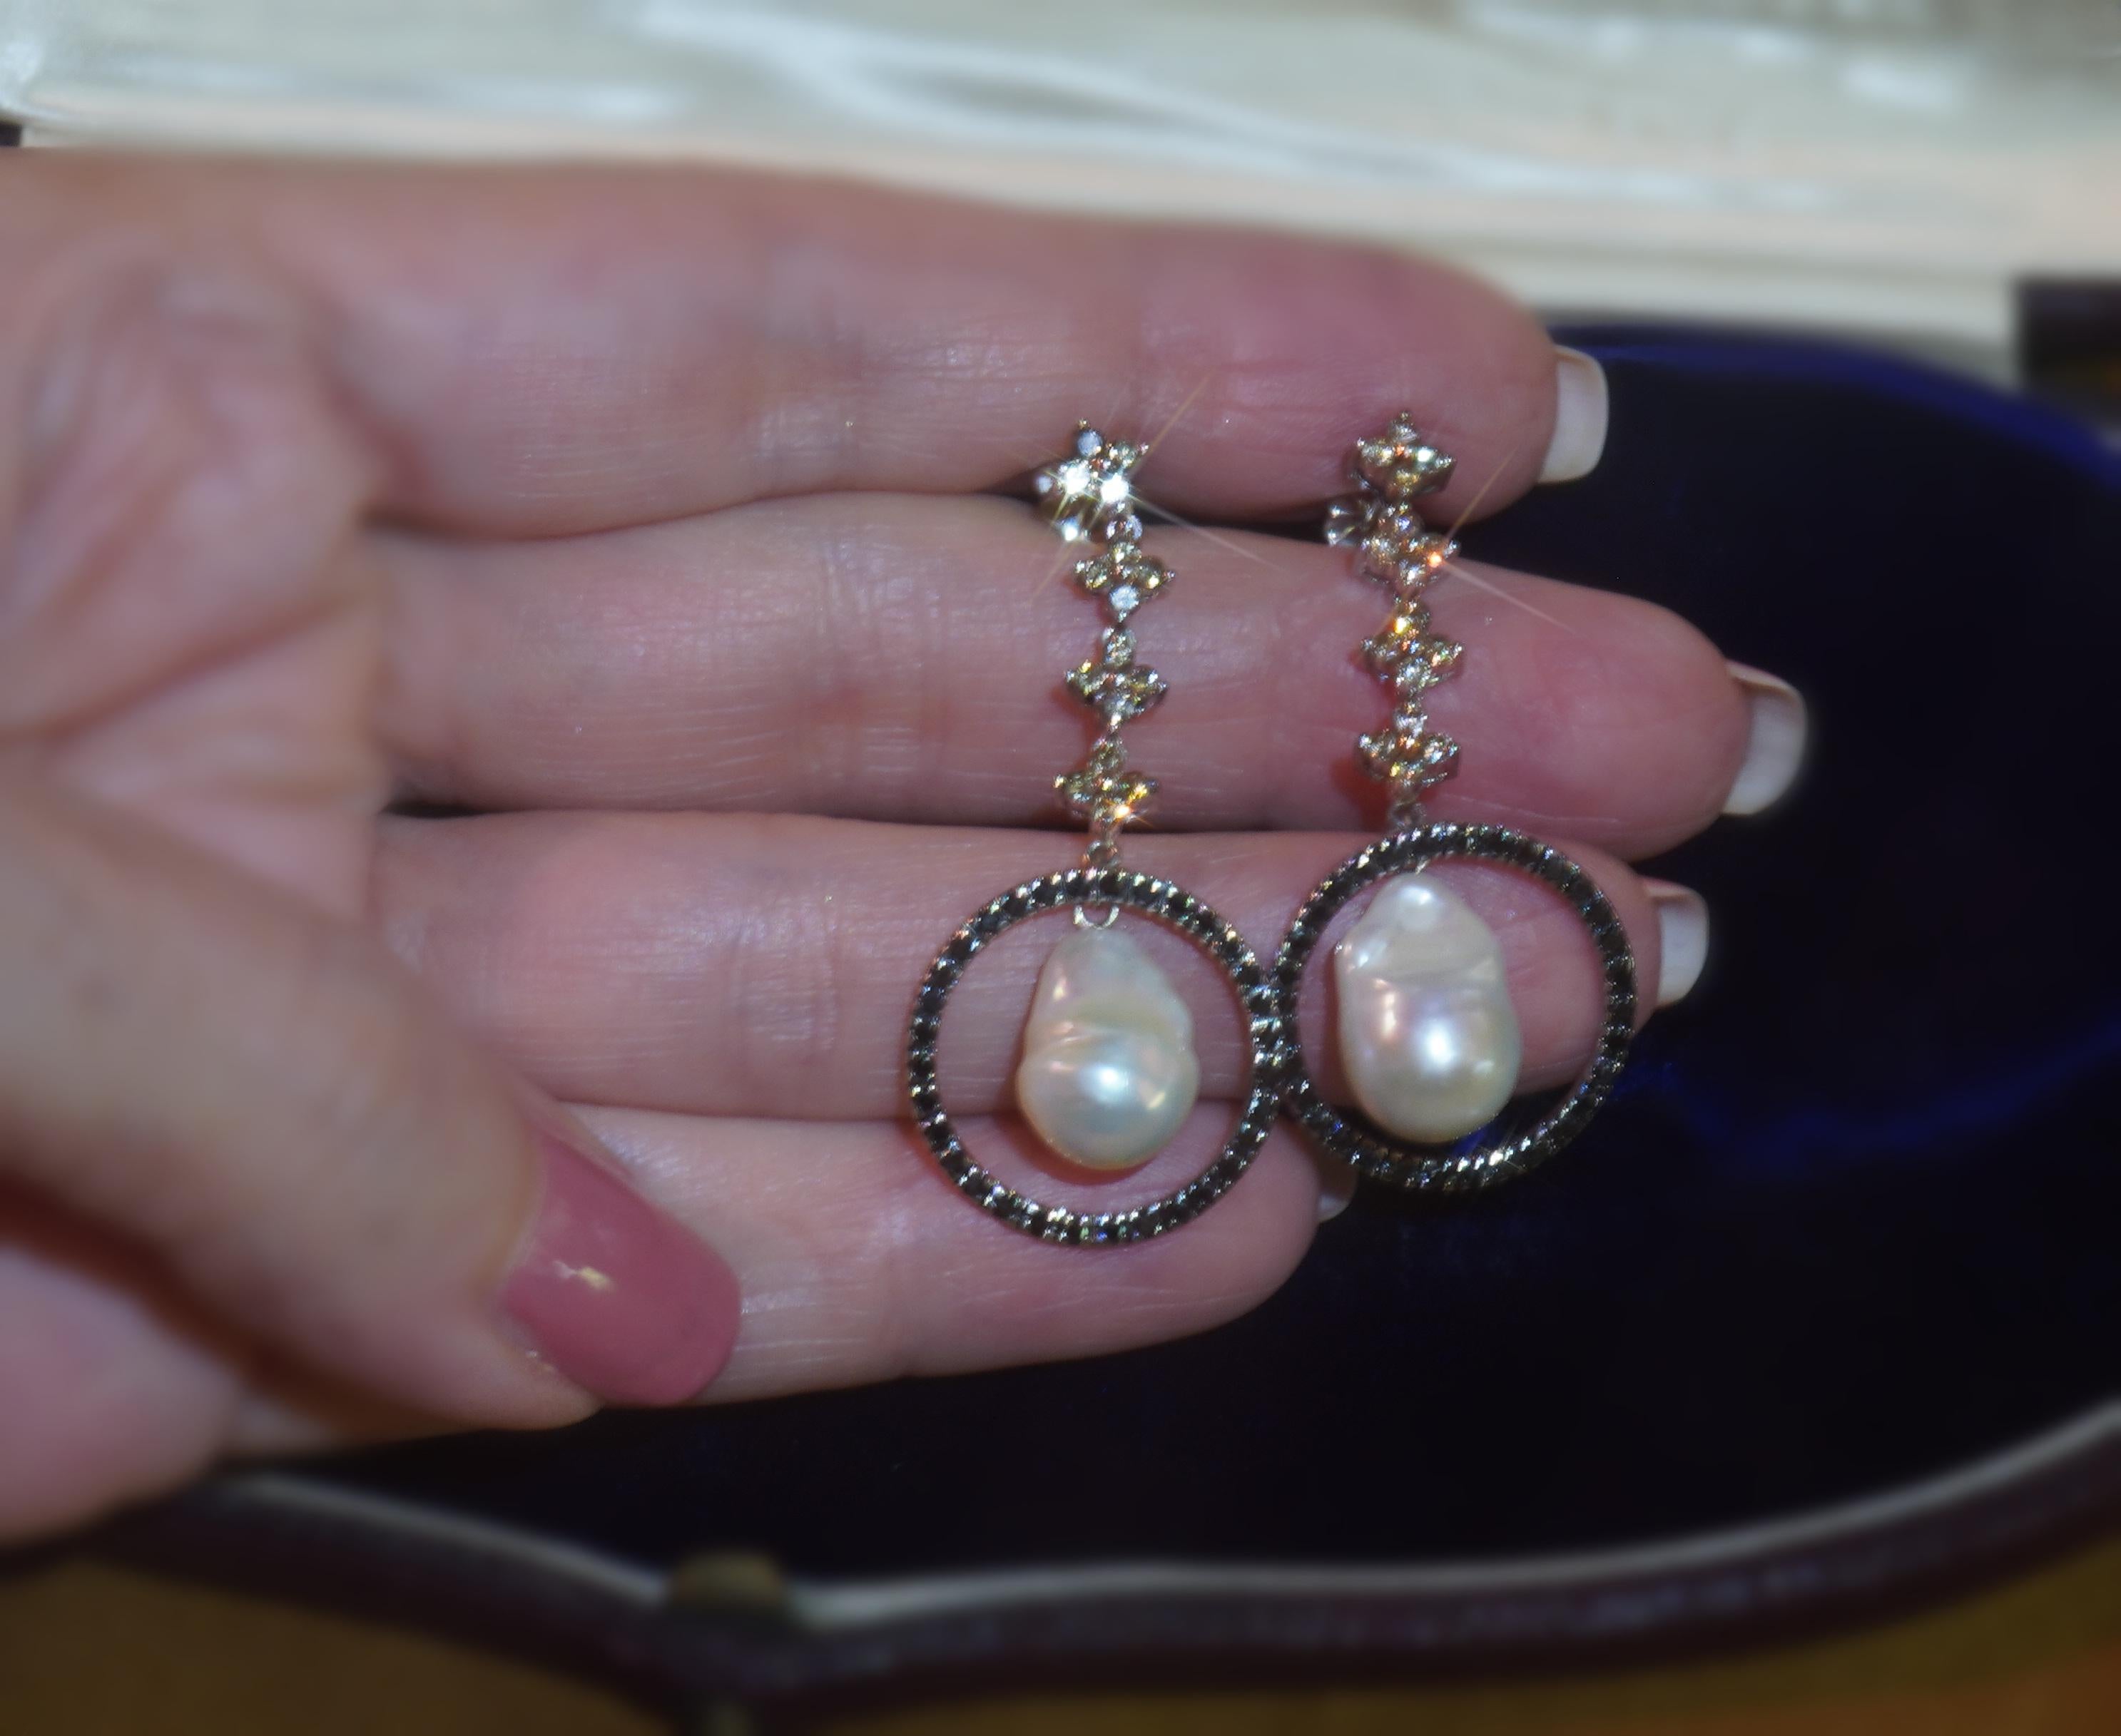 Old South Jewels proudly presents.... LUXURY.    GORGEOUS 2.24 CARATS PLATINUM SOUTH SEA PEARL & DIAMOND EARRINGS!   Huge Vintage Natural Saltwater Pearls and Bright Sparkling Black & Champaign Diamond Earrings....Stunning!   Huge Baroque Pearls Are